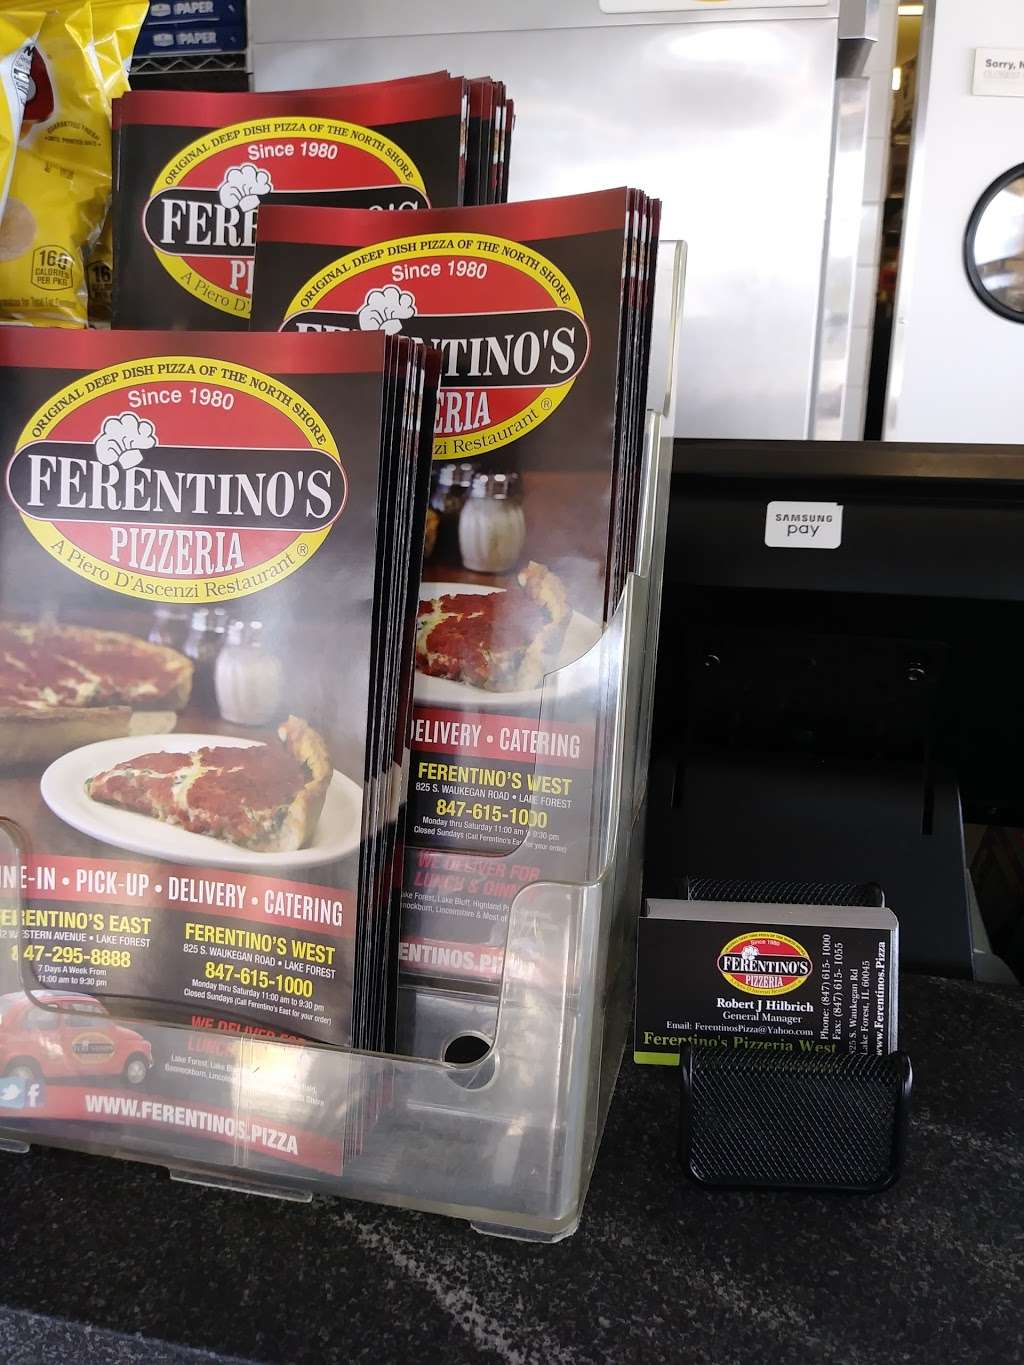 Ferentinos Pizzeria | 825 S Waukegan Rd, Lake Forest, IL 60045 | Phone: (847) 615-1000